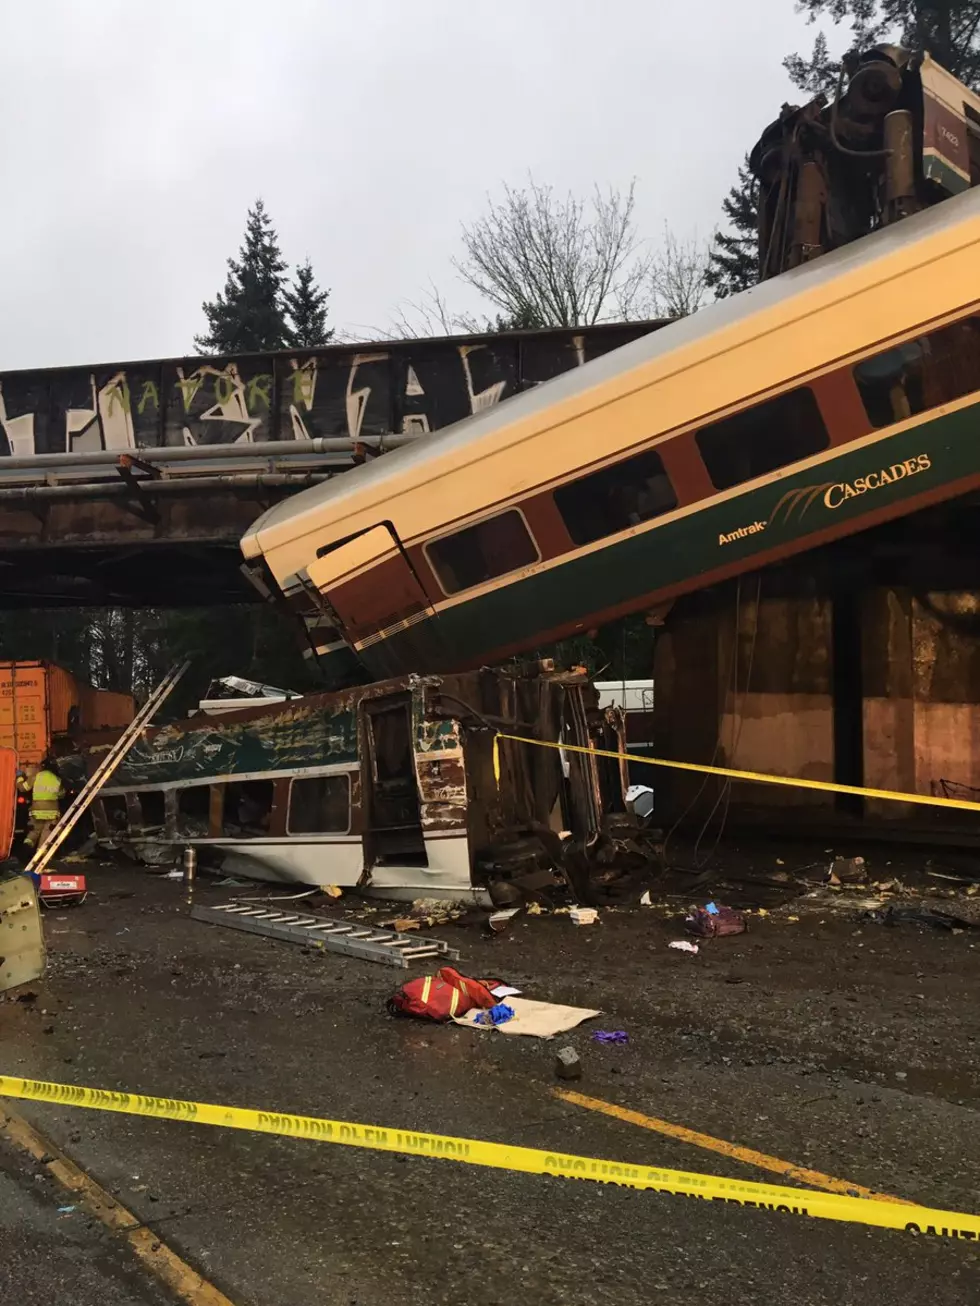 Engineer says he misjudged train location in fatal wreck